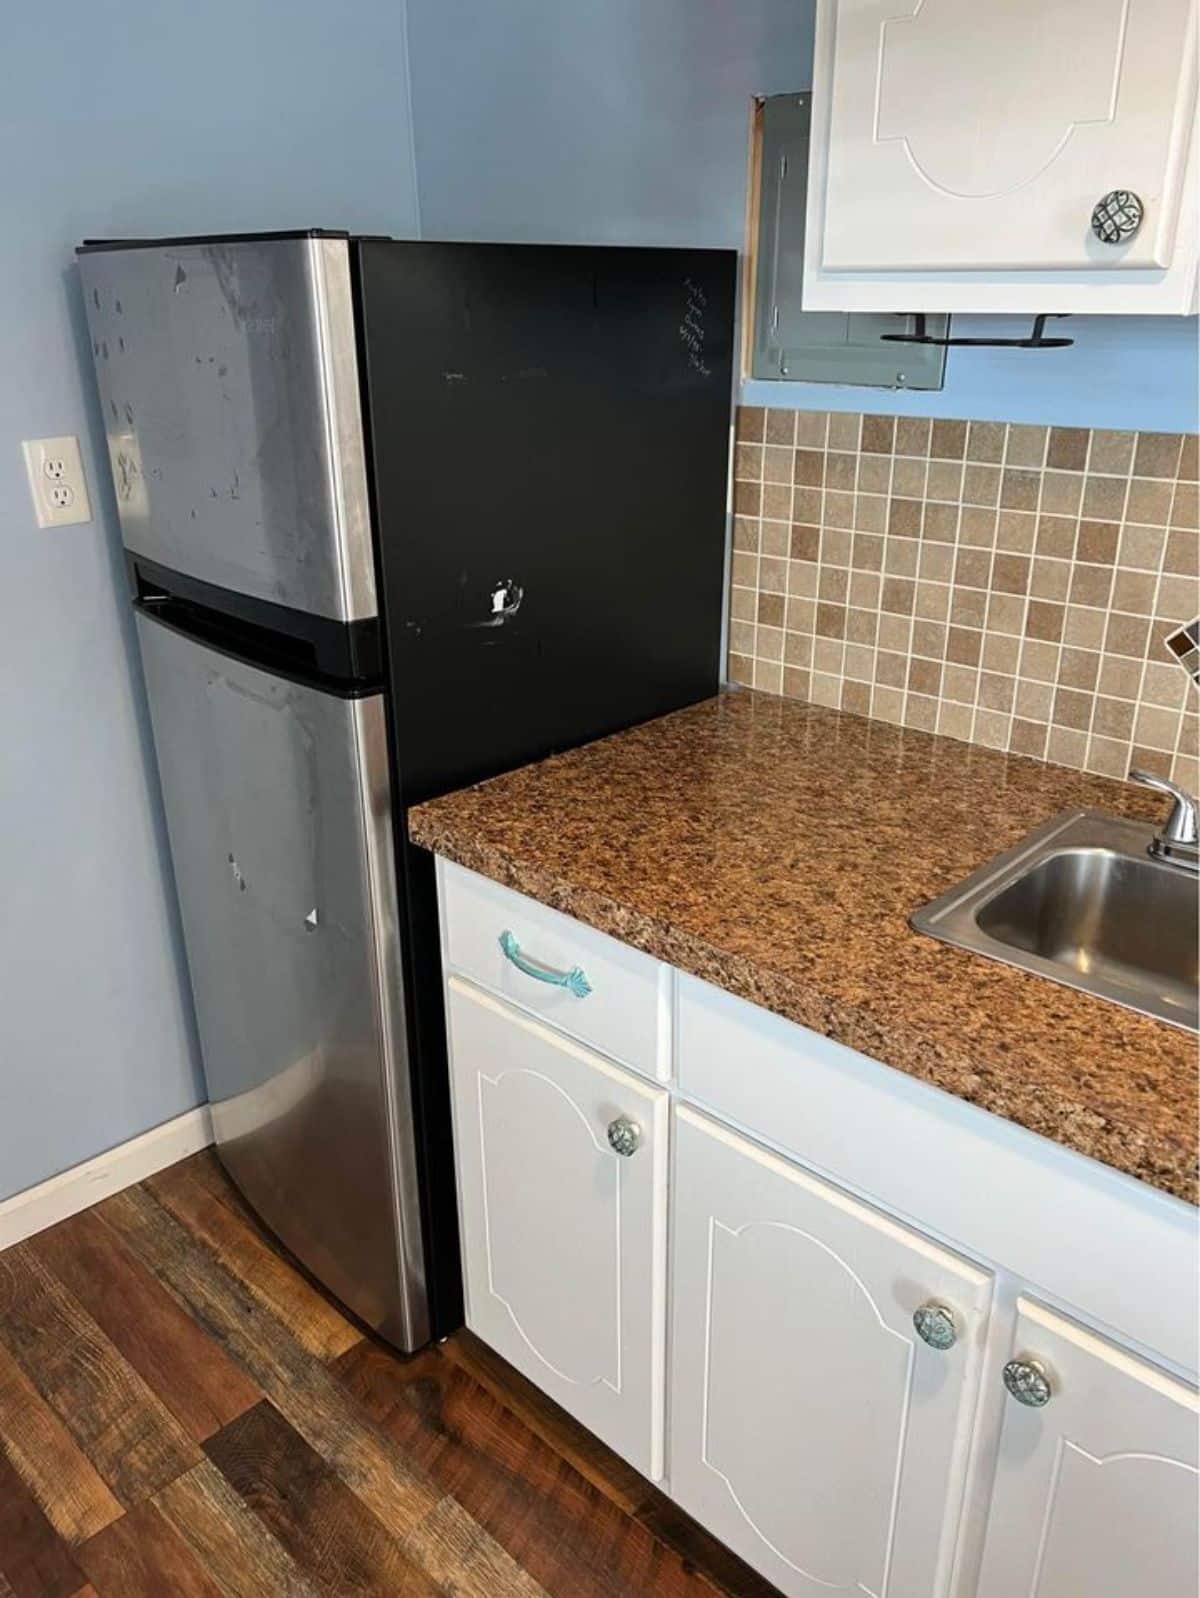 Huge refrigerator in kitchen of 32-footed Shed Tiny Home